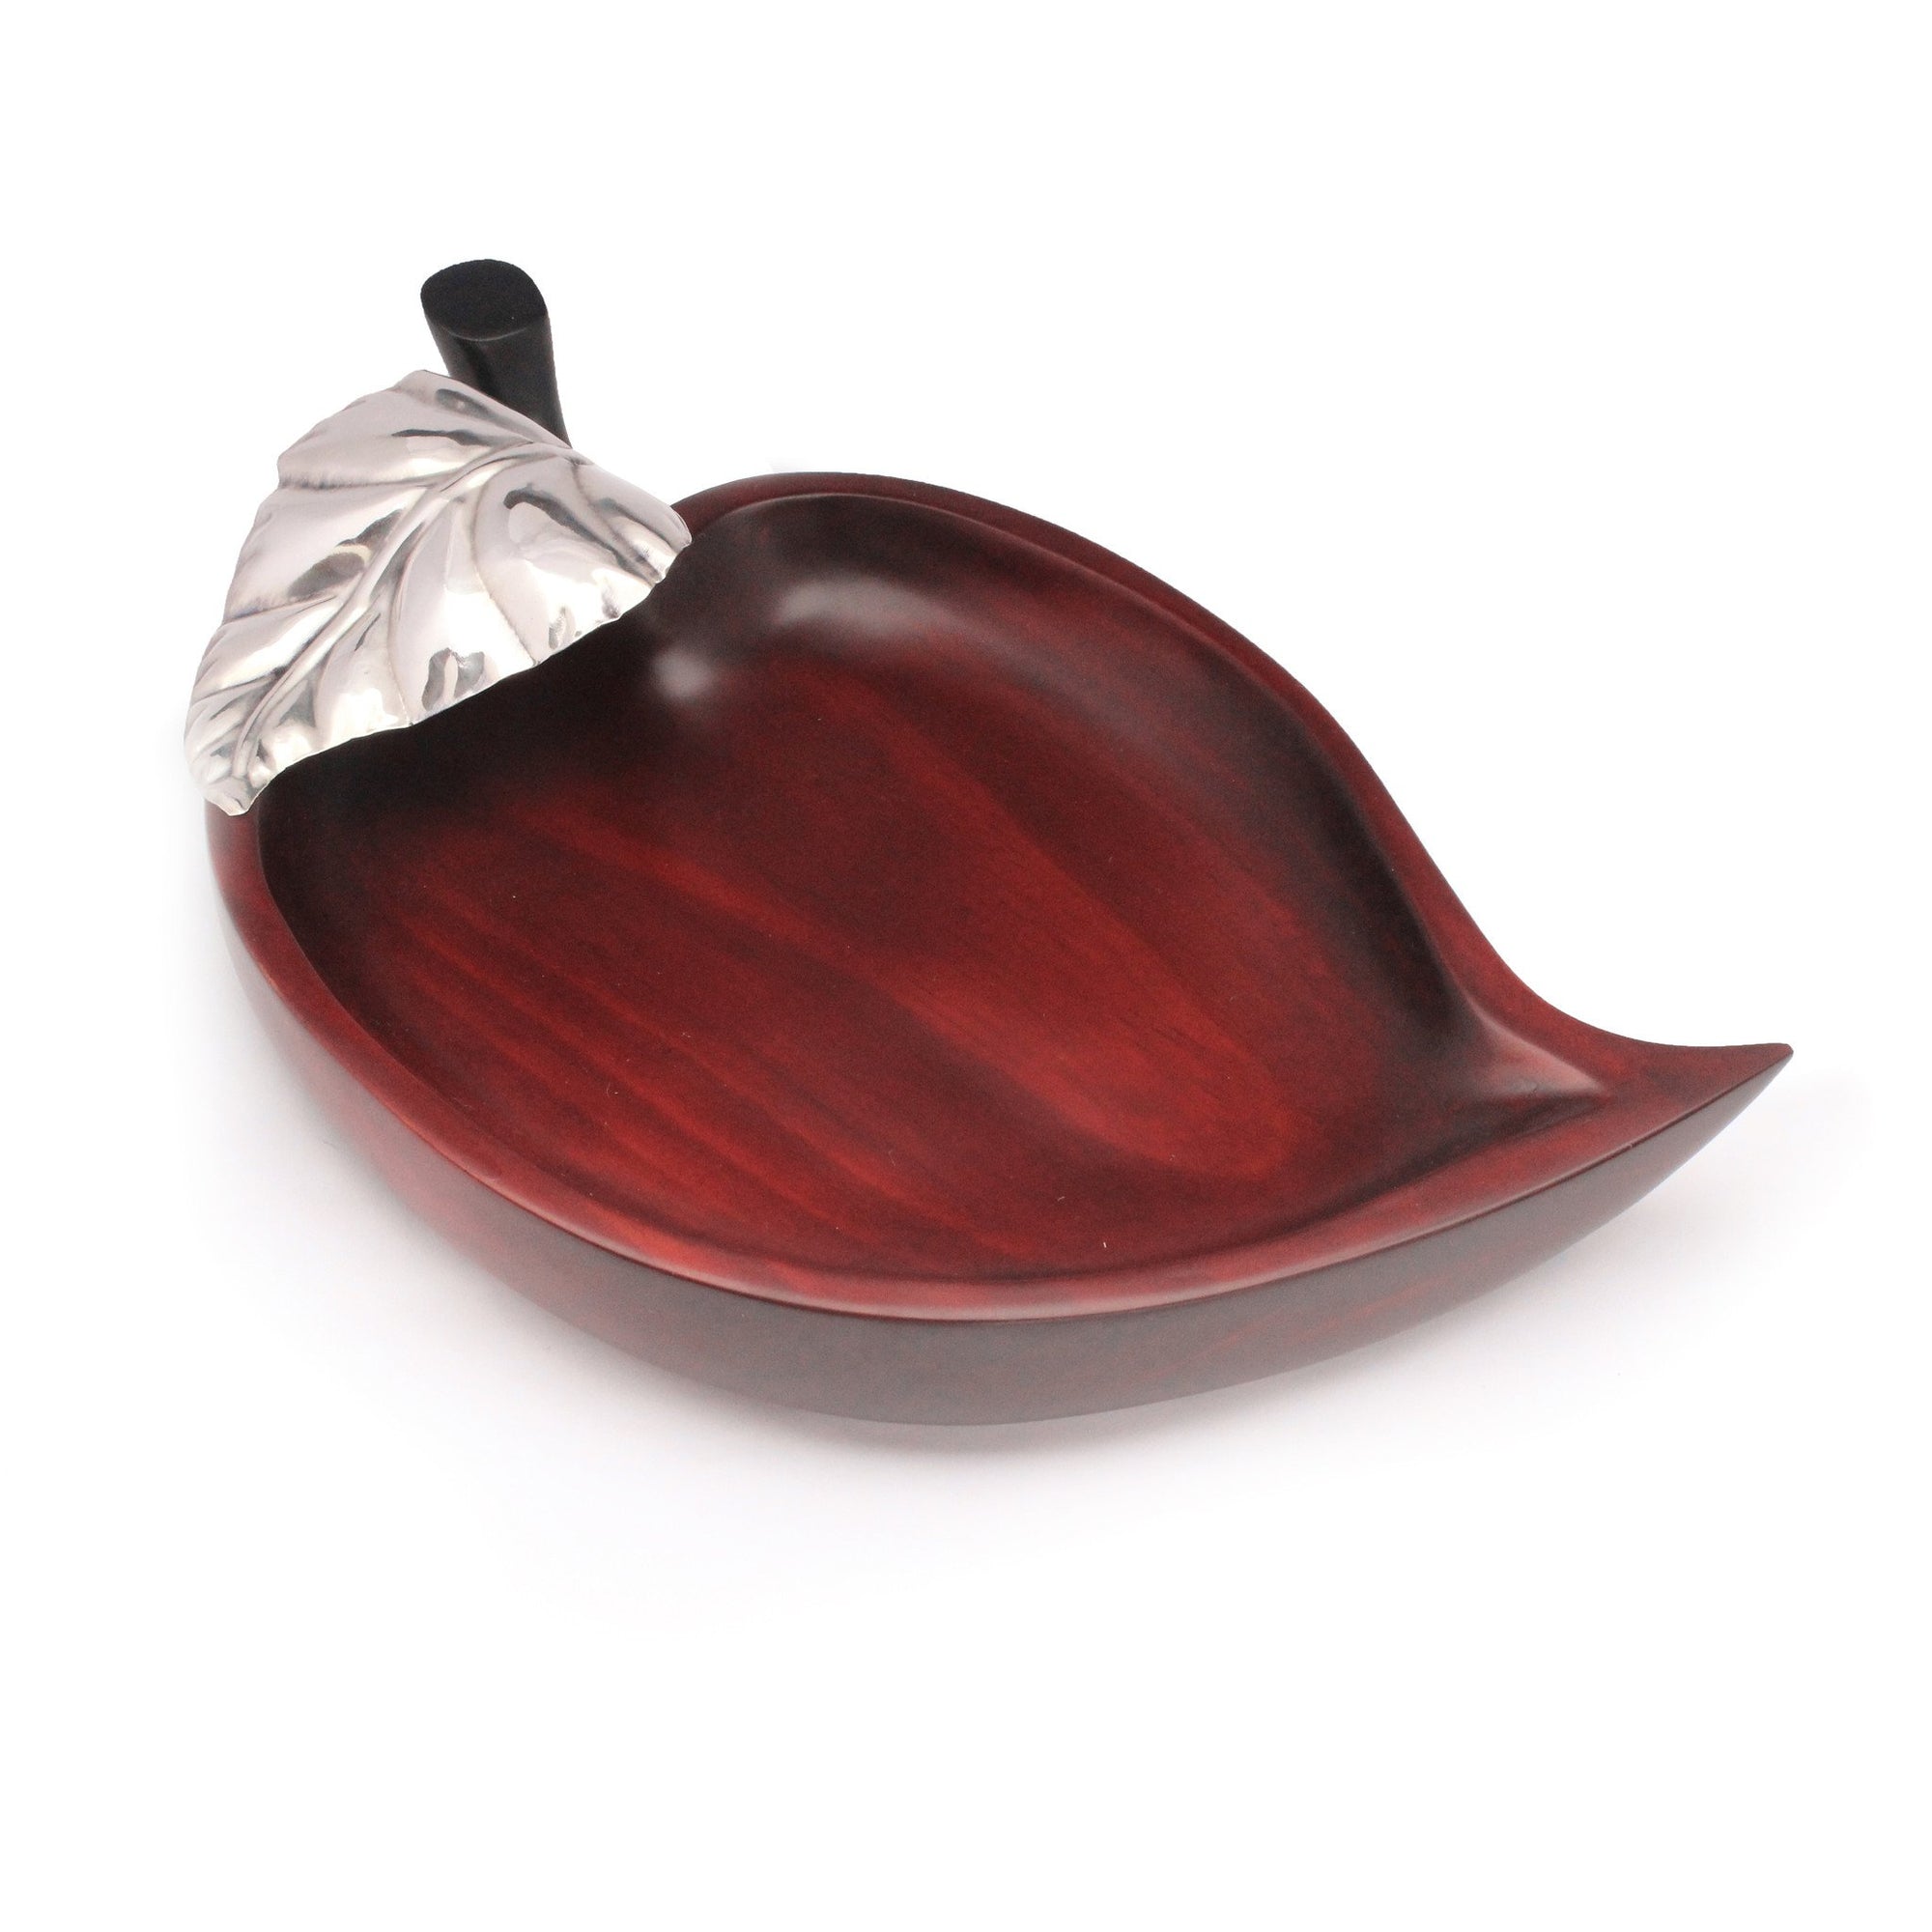 Mahogany Snack dish with Sterling Silver leaf - Qinti - The Peruvian Shop